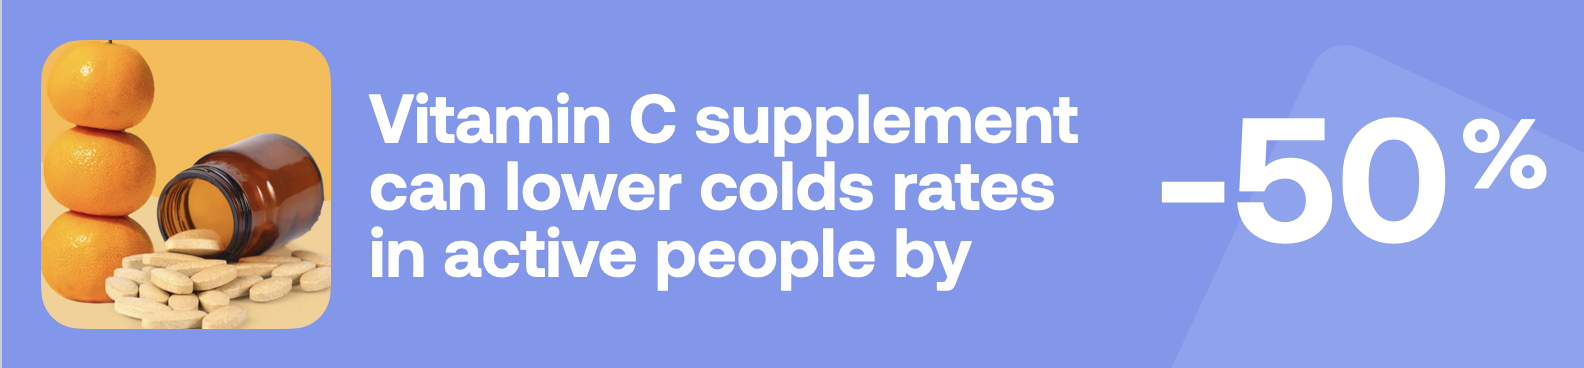 Vitamin C supplement can lower colds rates in active people by -50%, stats